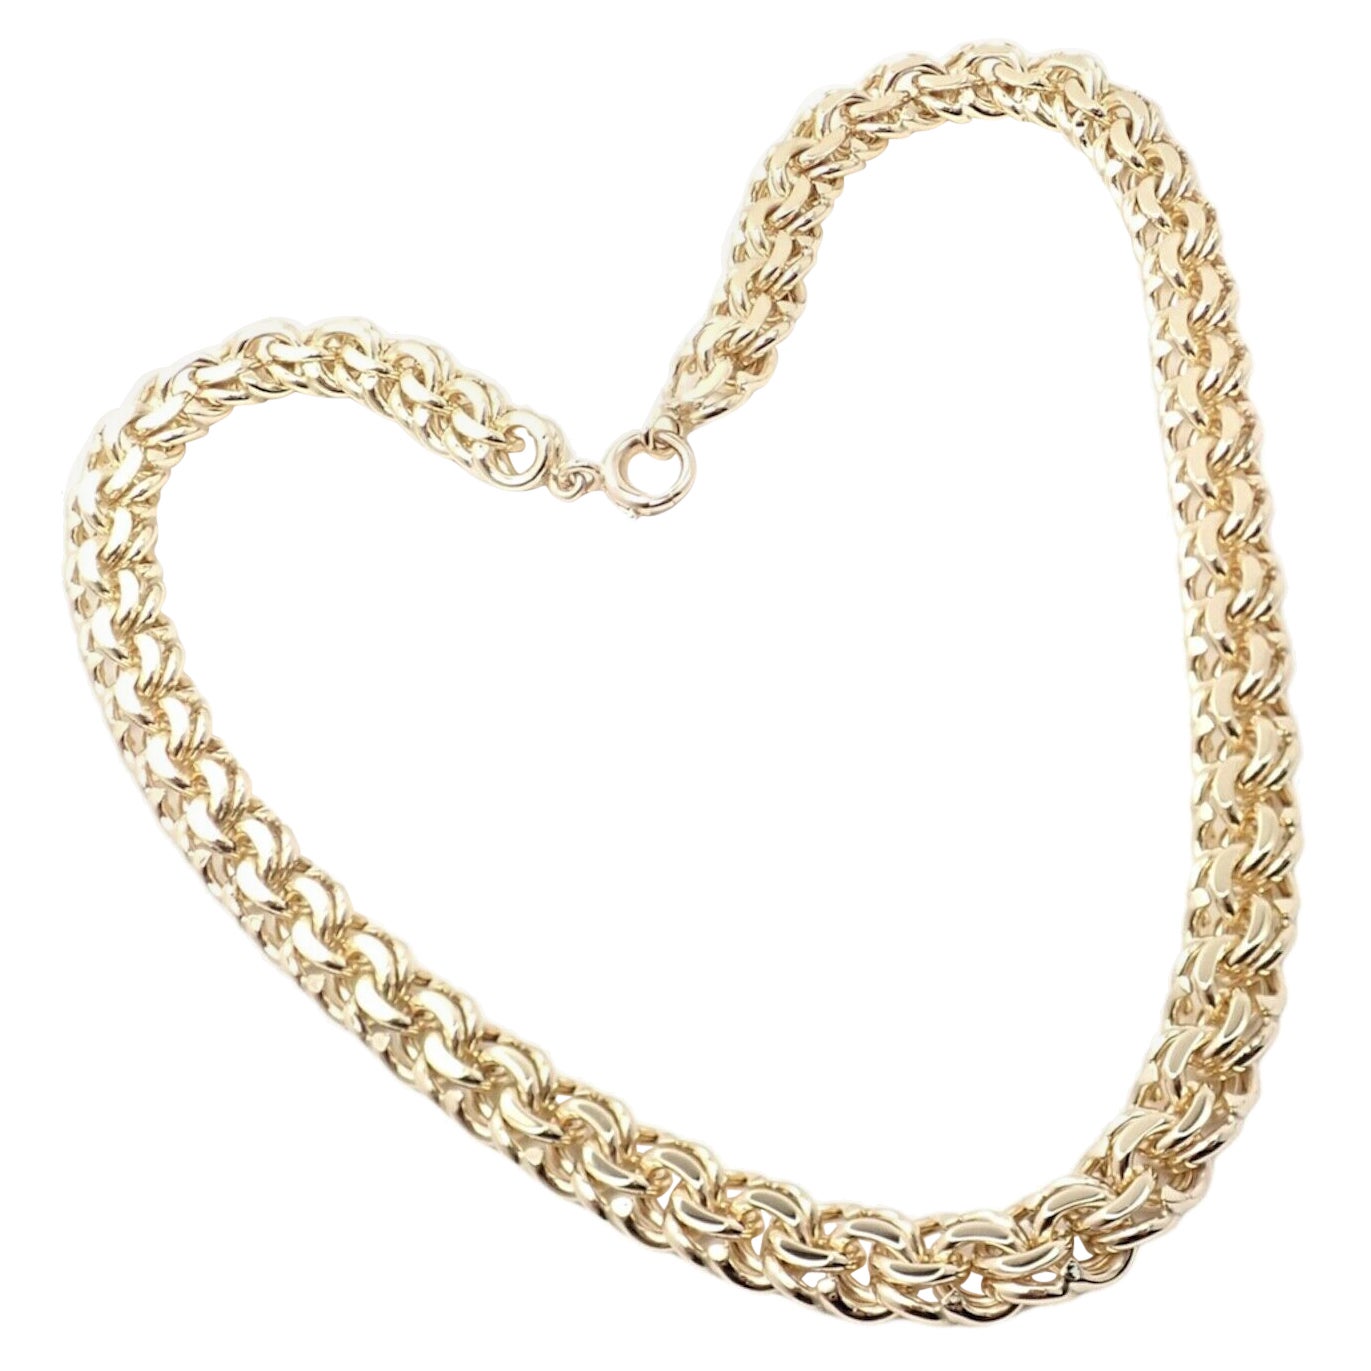 Vintage Tiffany & Co Link Yellow Gold Chain Necklace